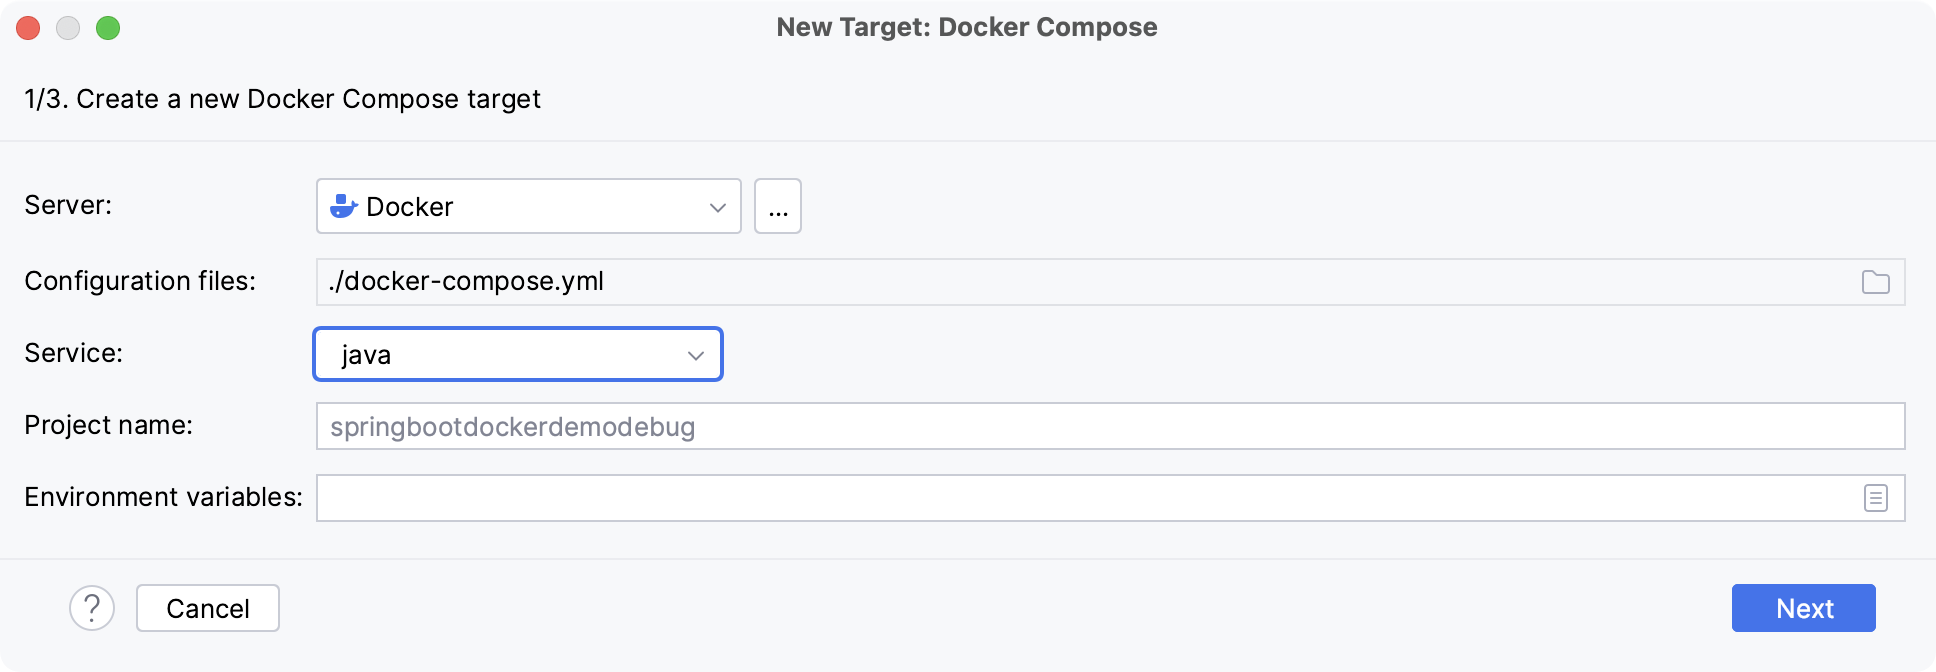 Add Docker Compose run target with Java service